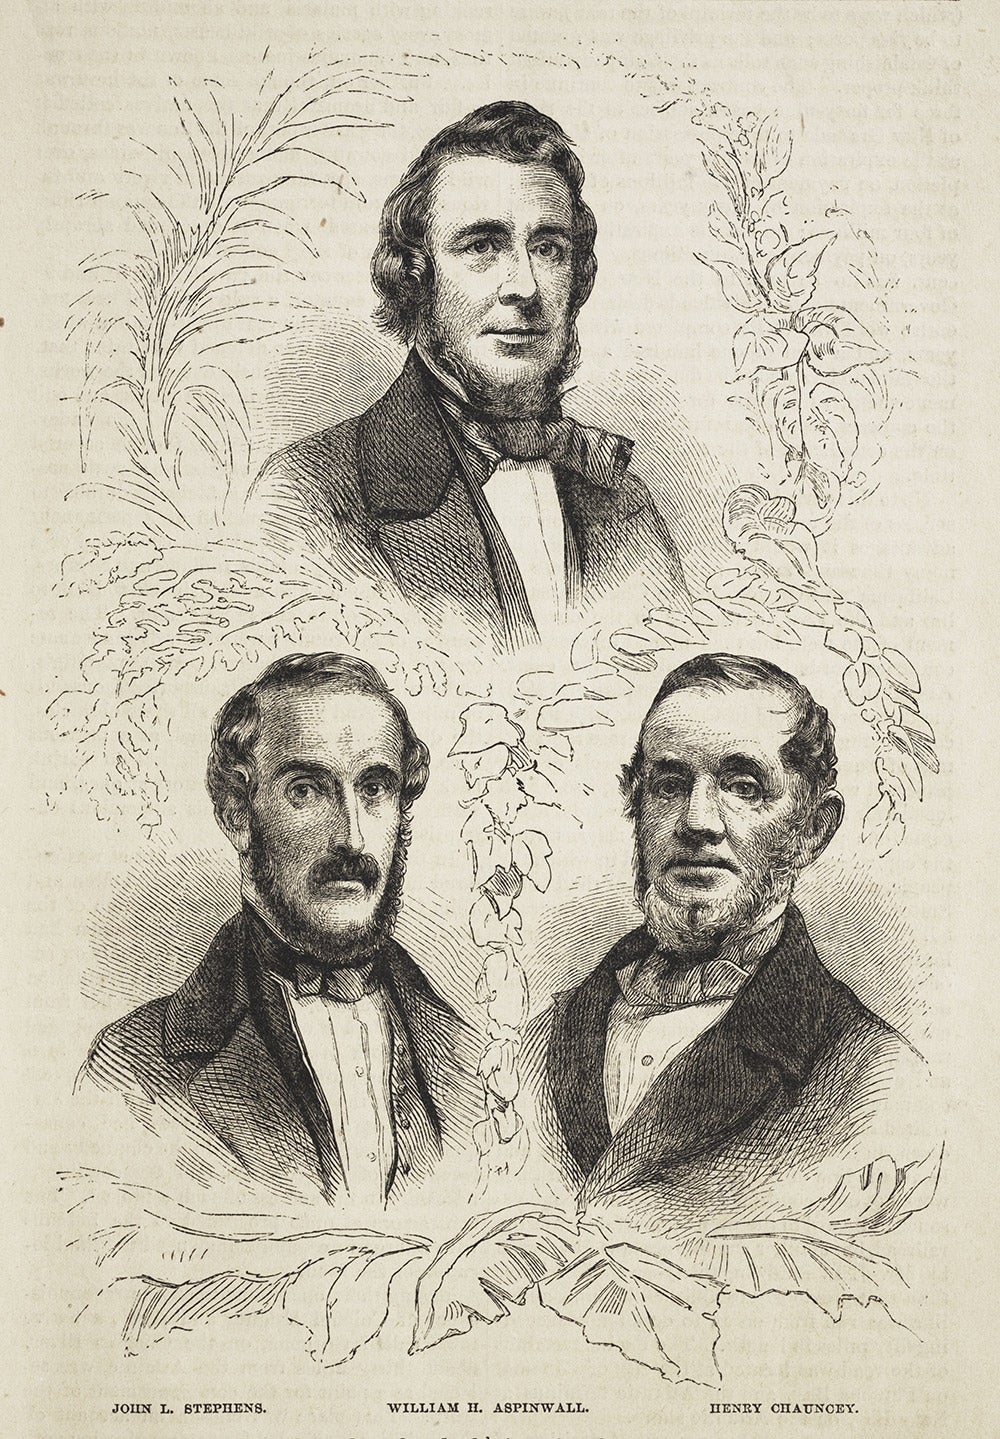 William Henry Aspinwall, John L. Stephens, and Henry Chauncy, New York businessmen, obtain the rights from New Grenada (present day Columbia, Panama, Venezuela, and Ecuador) to build the Panama Railroad across the Isthmus